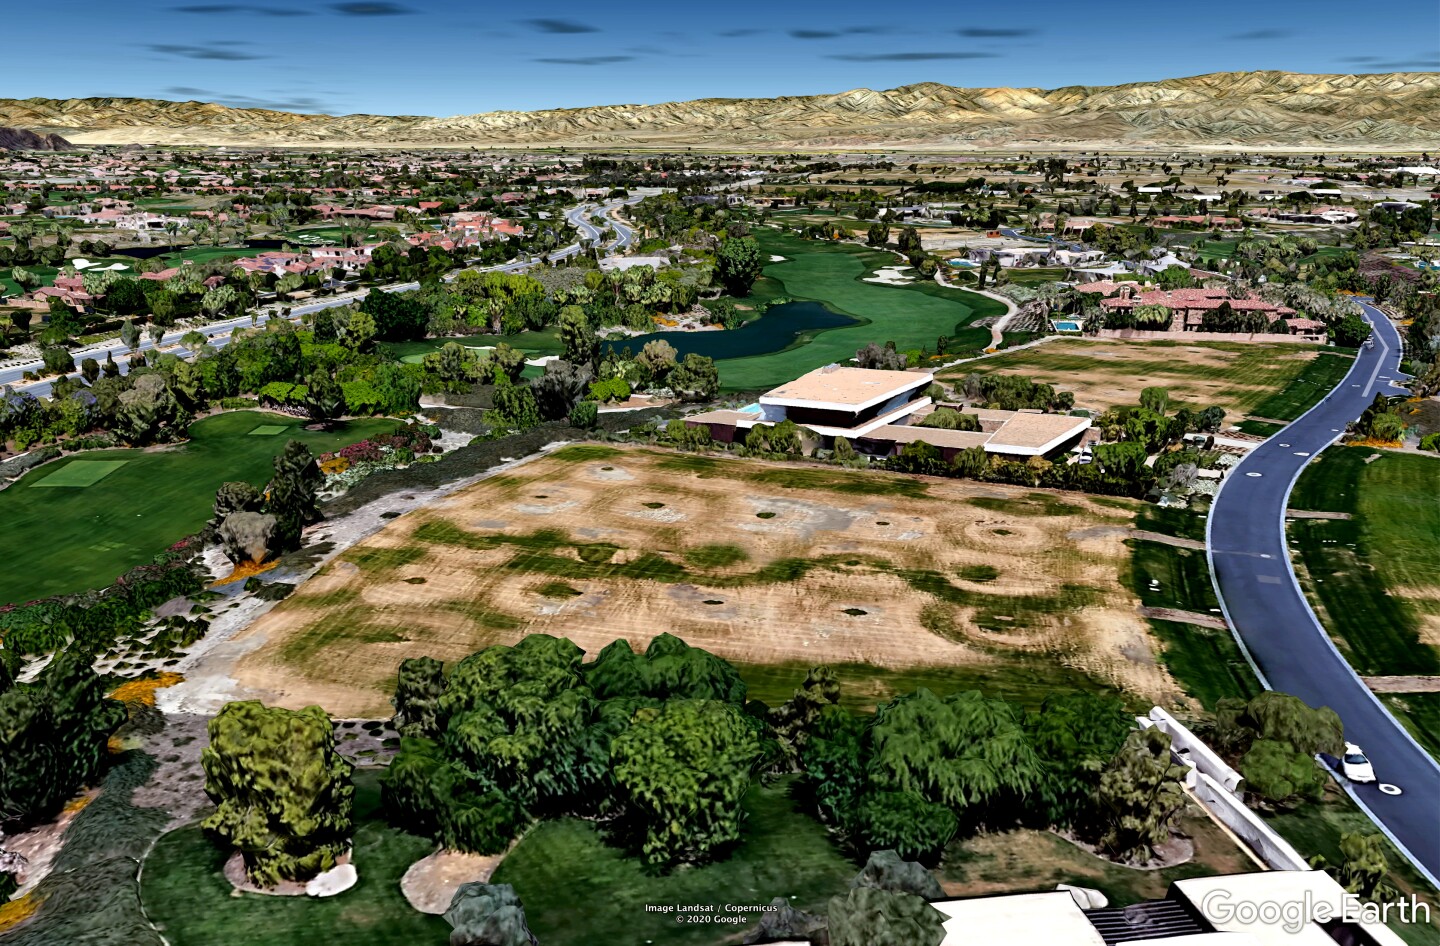 Kim Kardashian West and Kanye West have paid $6.3 million for a roughly two-acre home site in La Quinta's Madison Club community. Kardashian West's lot is a few doors down the a modern mansion owned by her mother, Kris Jenner. Her sister, Kylie, also owns a home site on the street. (Google Earth)